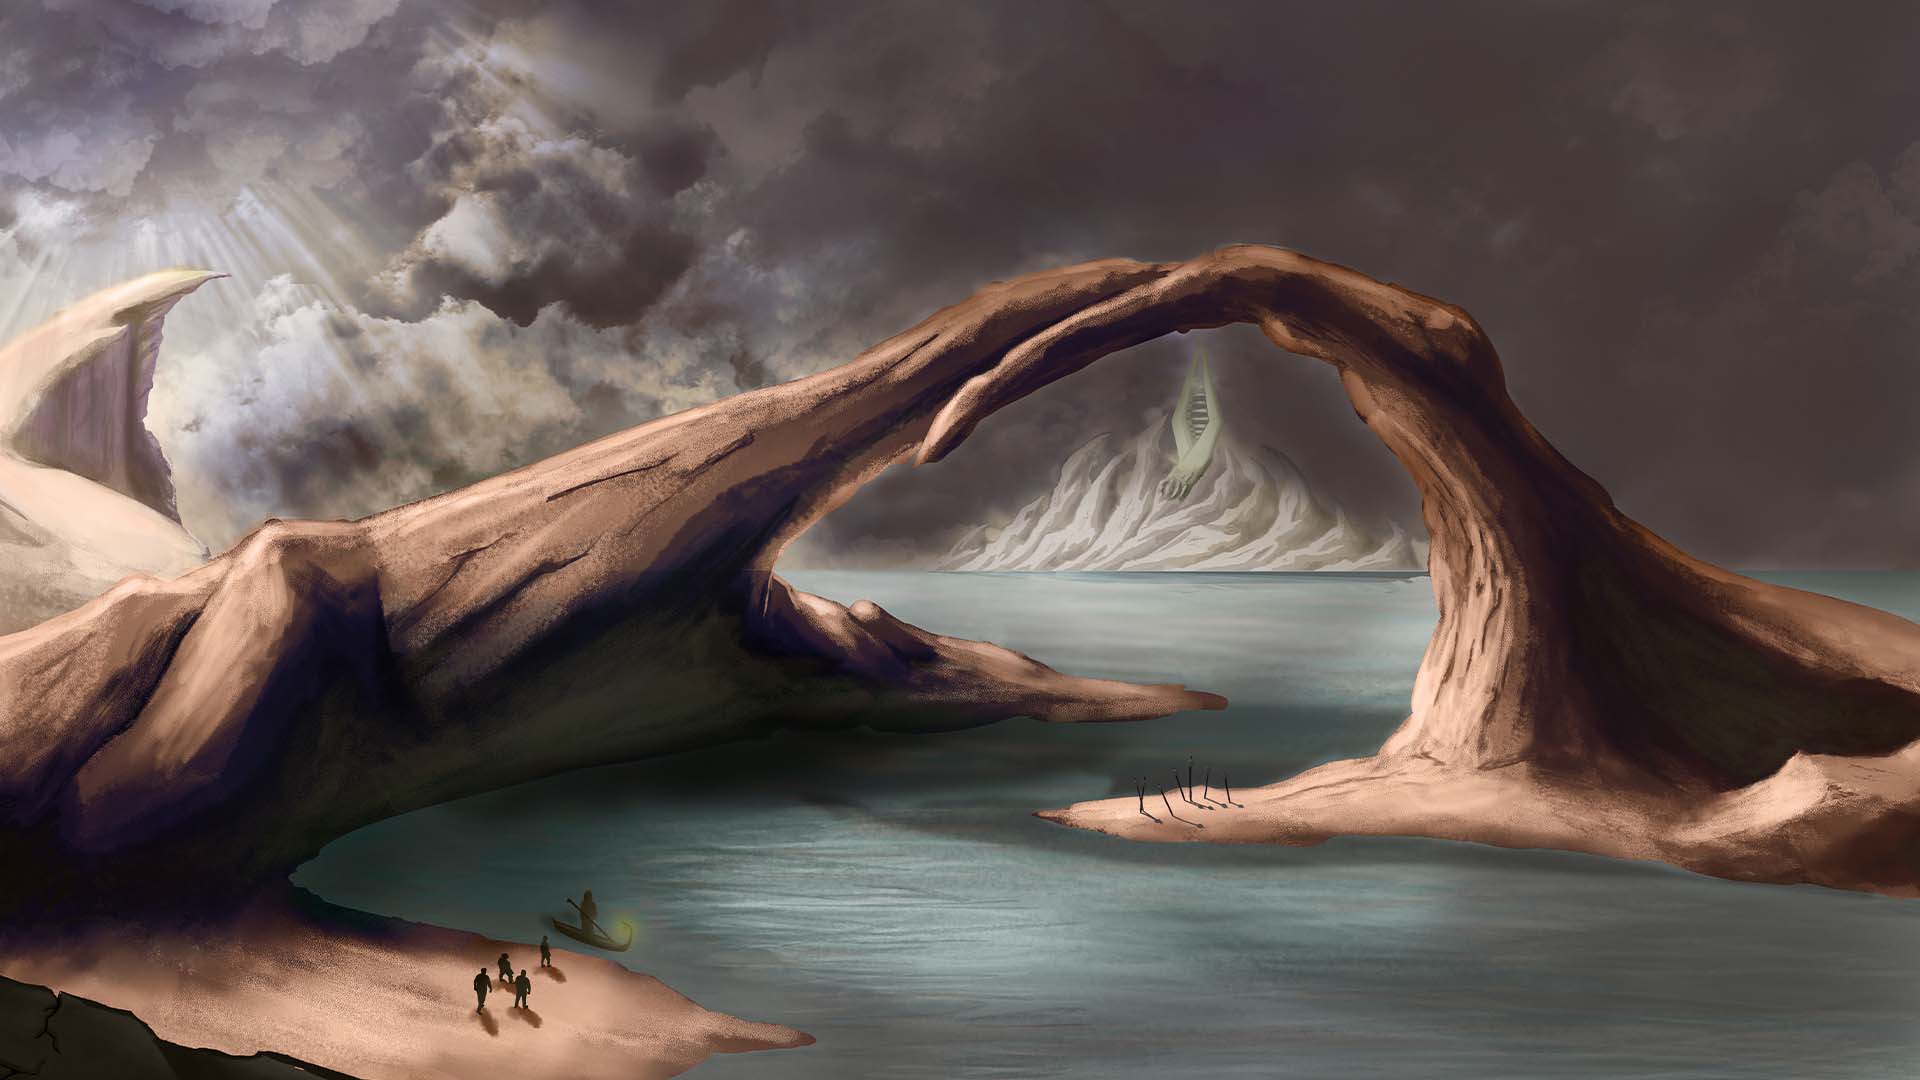  / “Styx” Digital Illustration, 36”x18” digital, 2020. Using many different techniques in photoshop, this illustration shows a group of souls boarding Chiron’s boat to cross the River Styx to the underworld."